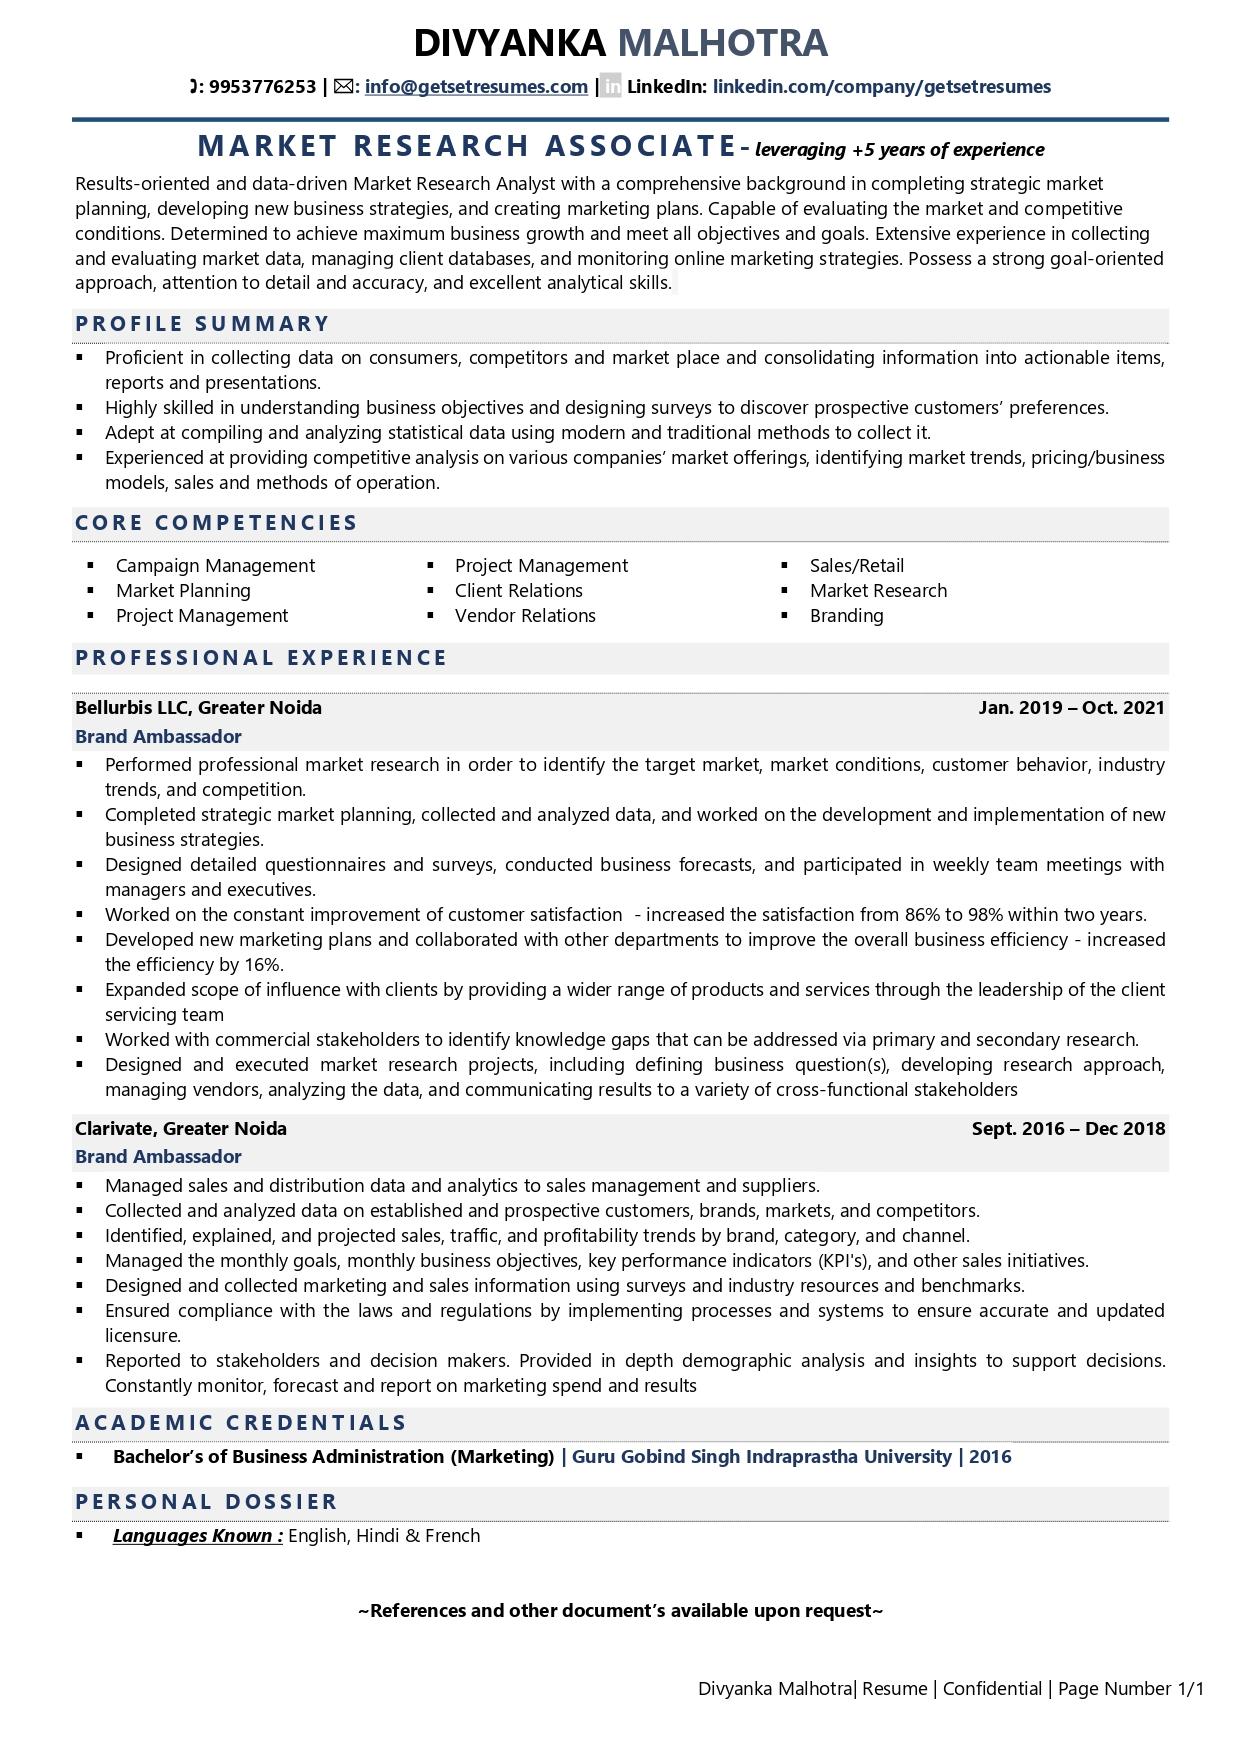 Market Research Associate - Resume Example & Template